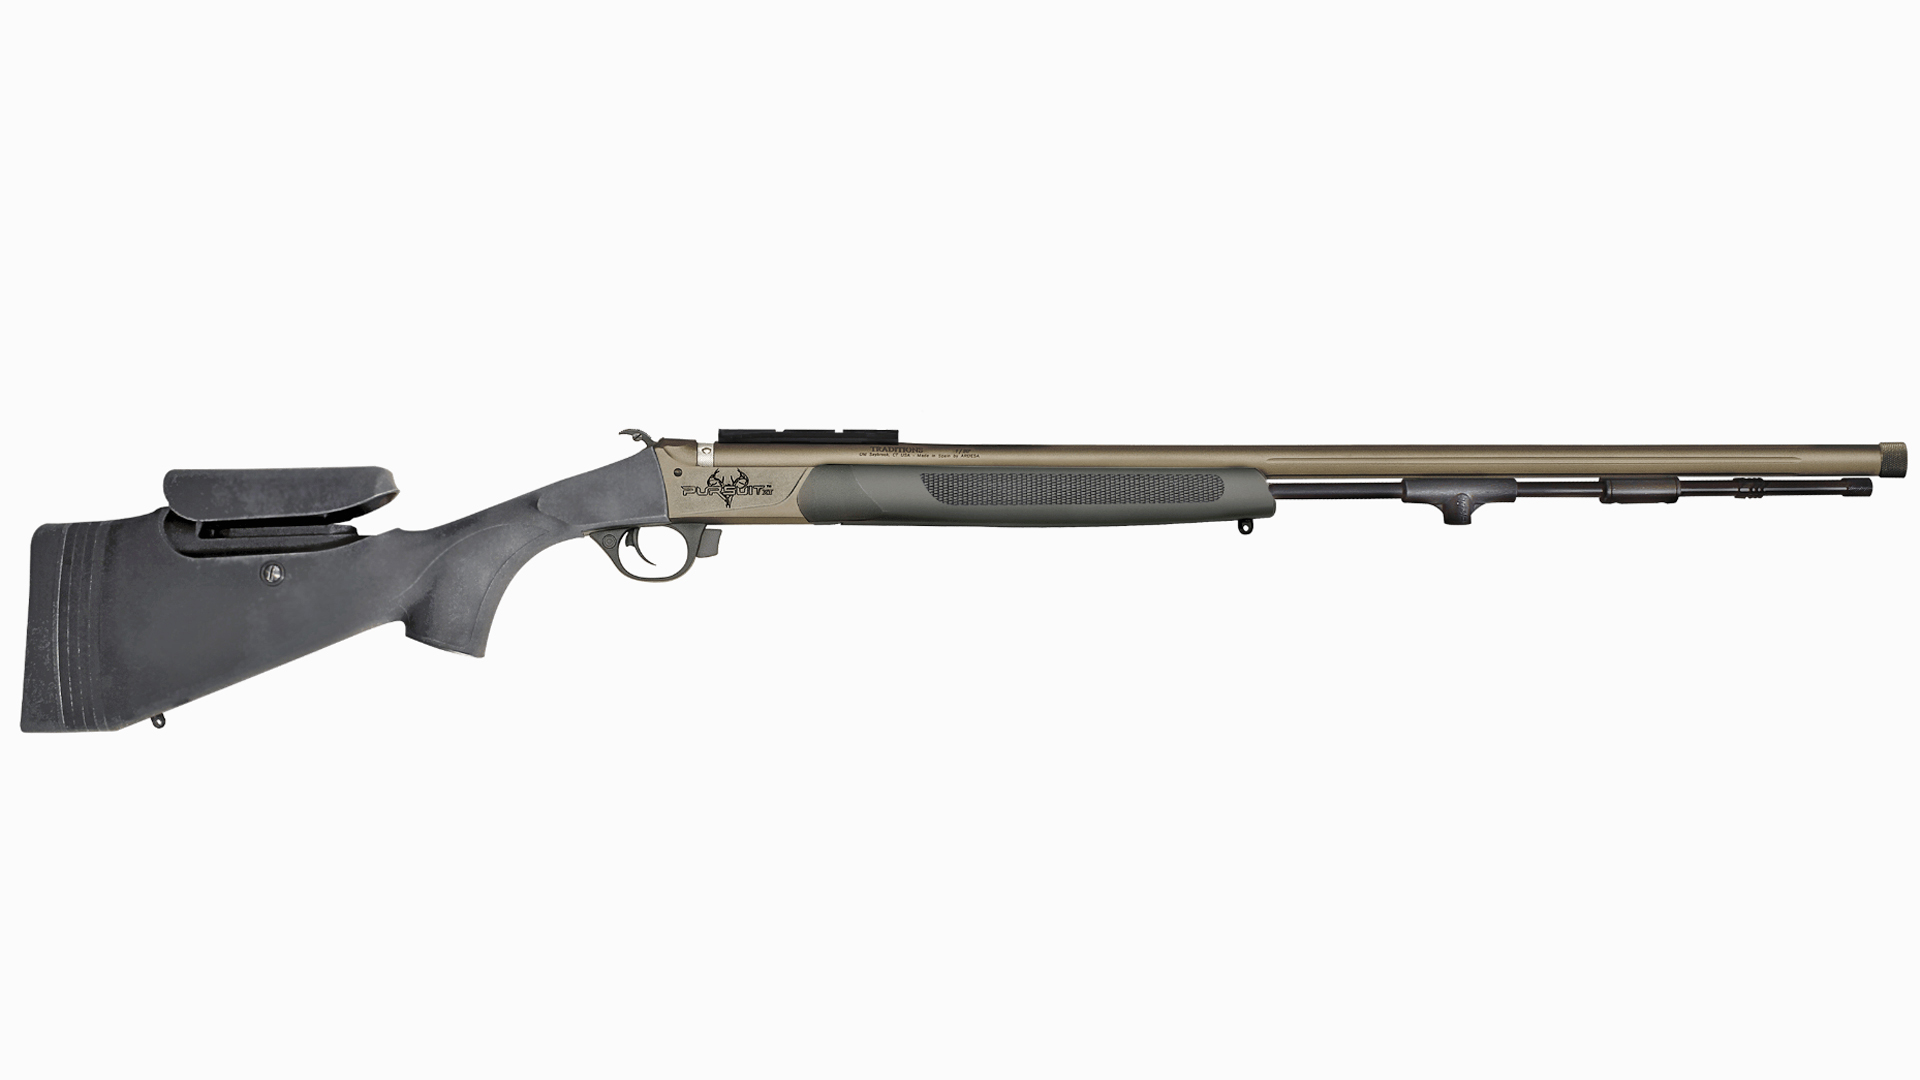 Right side of the Traditions Pro Series Pursuit XT muzzleloader pictured with black furniture.